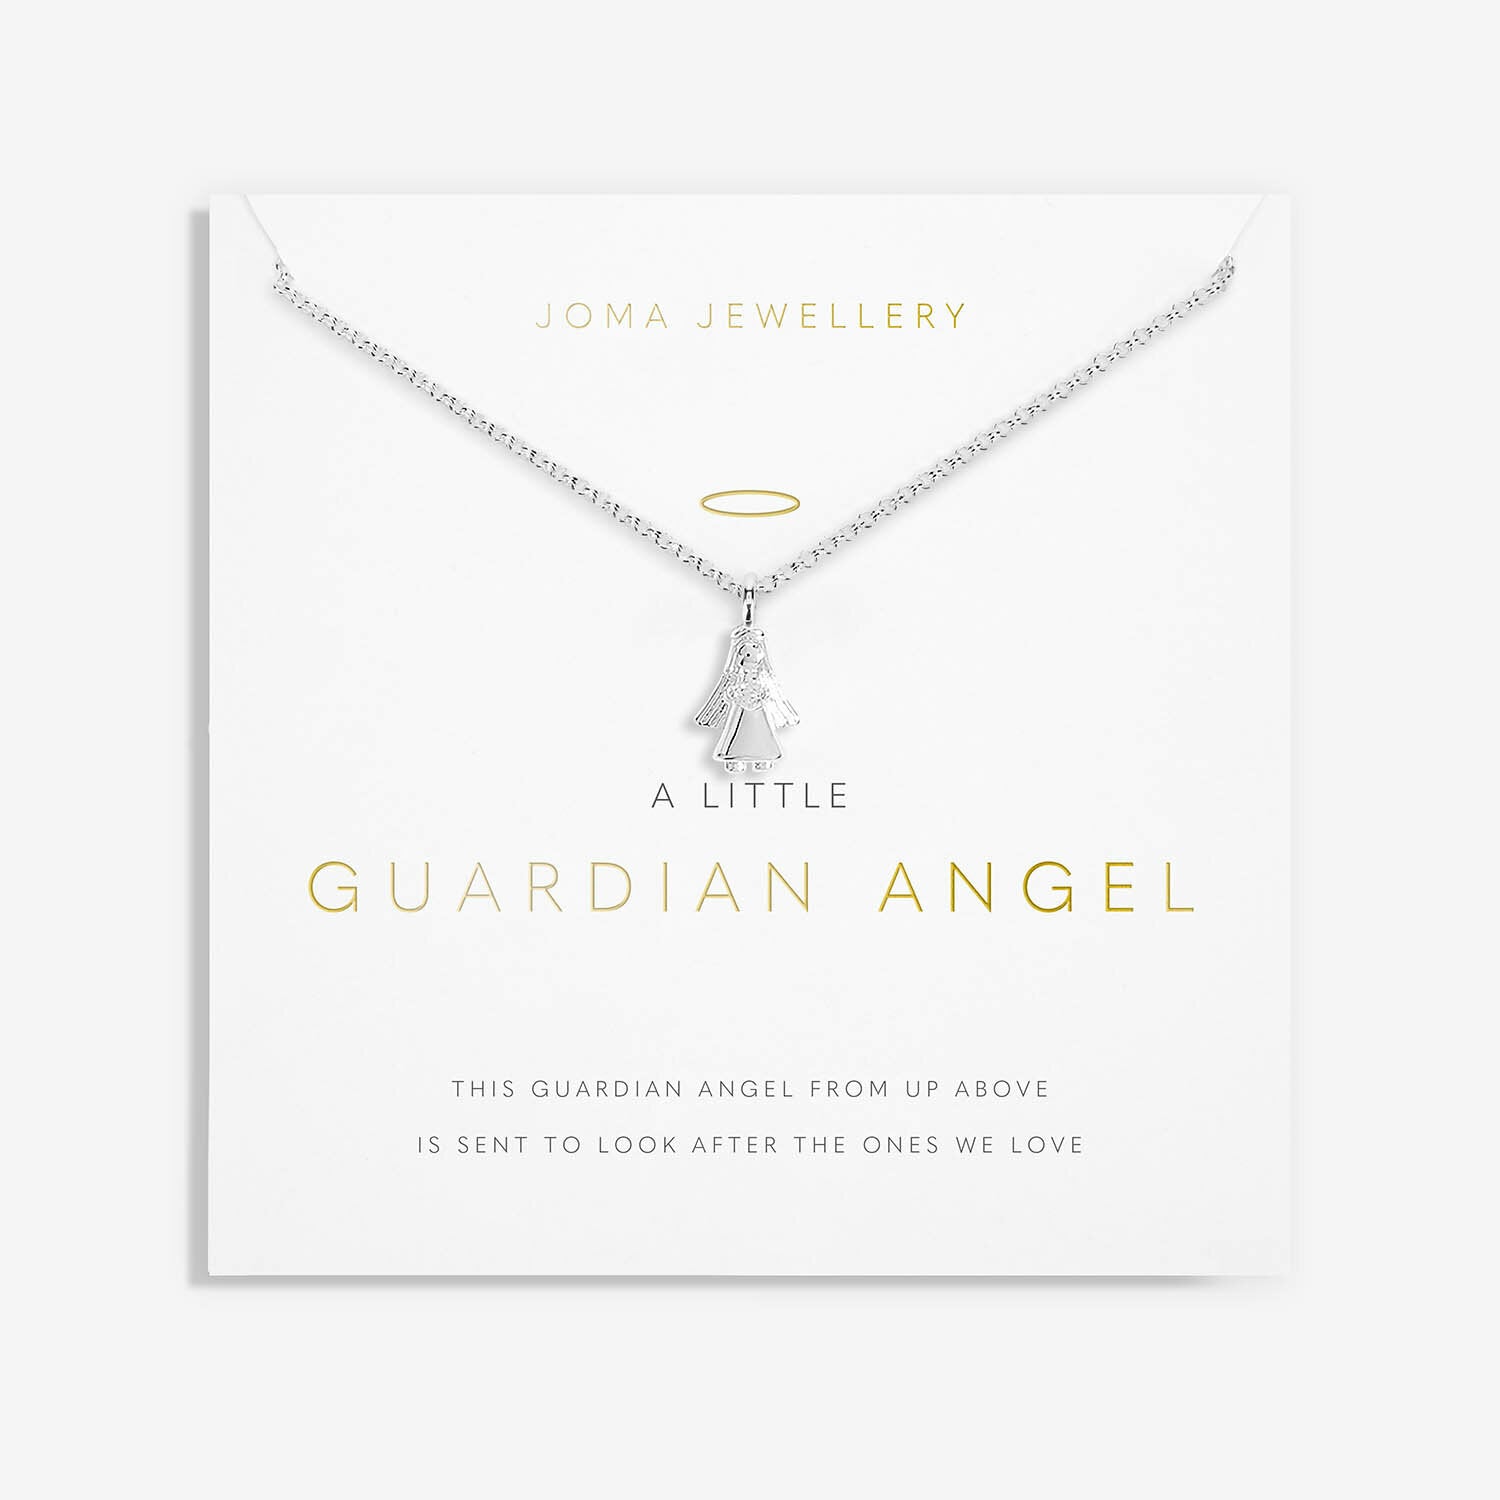 Joma Jewellery A Little 'Guardian Angel' Necklace|More Than Just A Gift